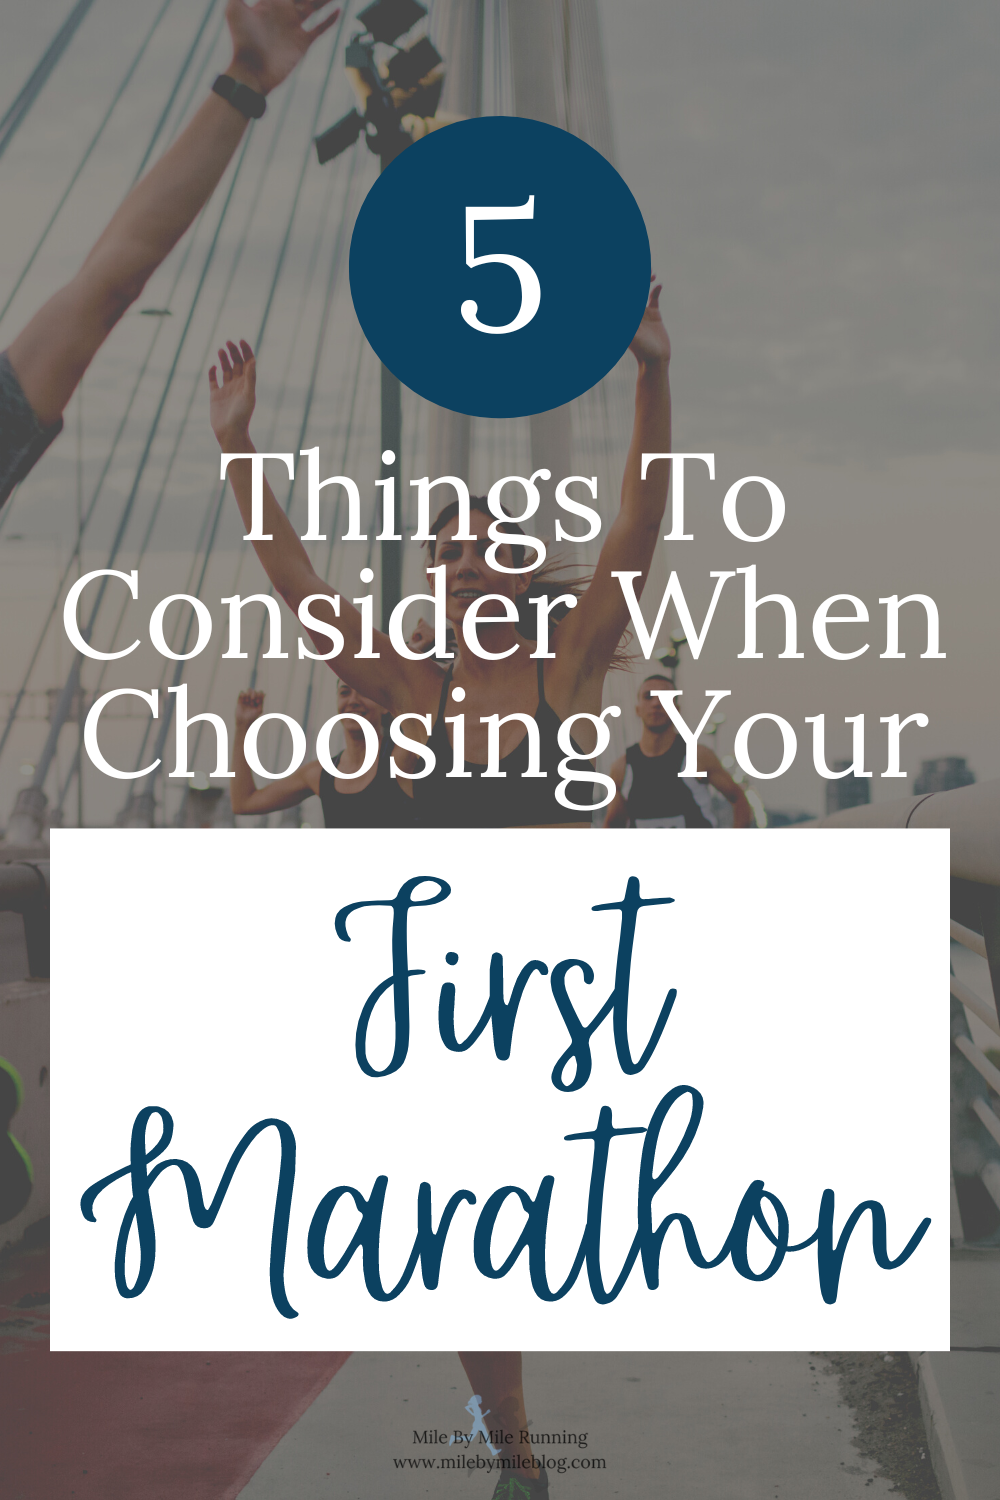 So you've decided that you are ready to run a marathon. How exciting! Now it's time to choose you first marathon. While the marathon options are usually endless there are some things you will want to think about before you sign up. Here are 5 things to consider when choosing your first marathon.